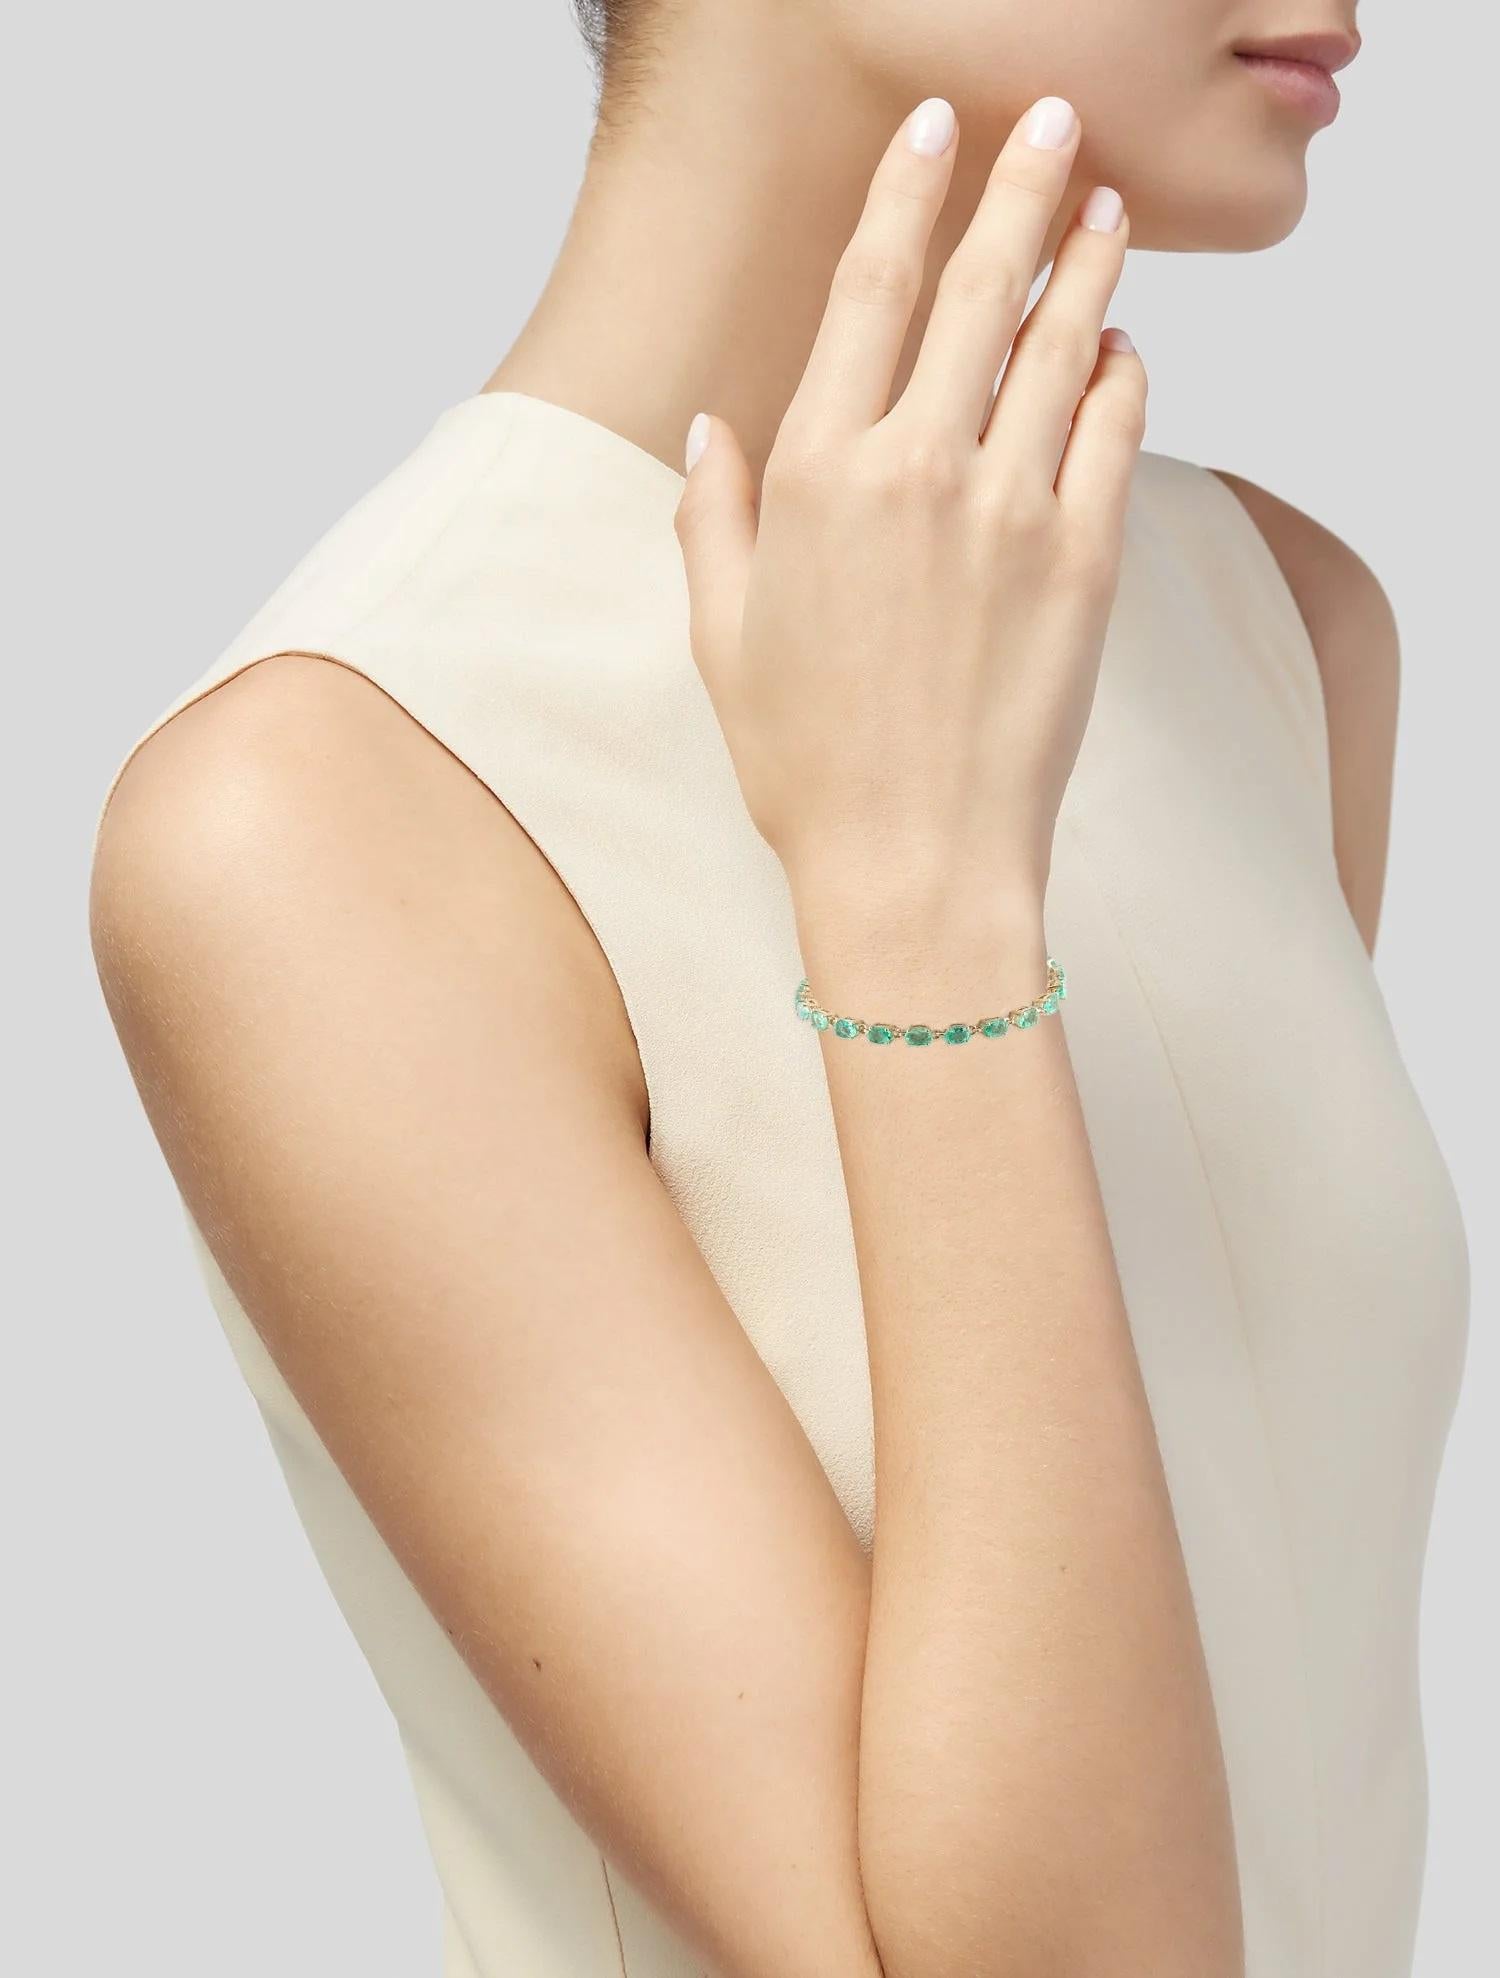 Elevate your wristwear with this exquisite 14K Emerald Link Bracelet, adorned with 9.62 carats of faceted oval emeralds. Crafted in lustrous yellow gold, this bracelet exudes elegance and sophistication, making it the perfect statement piece for any